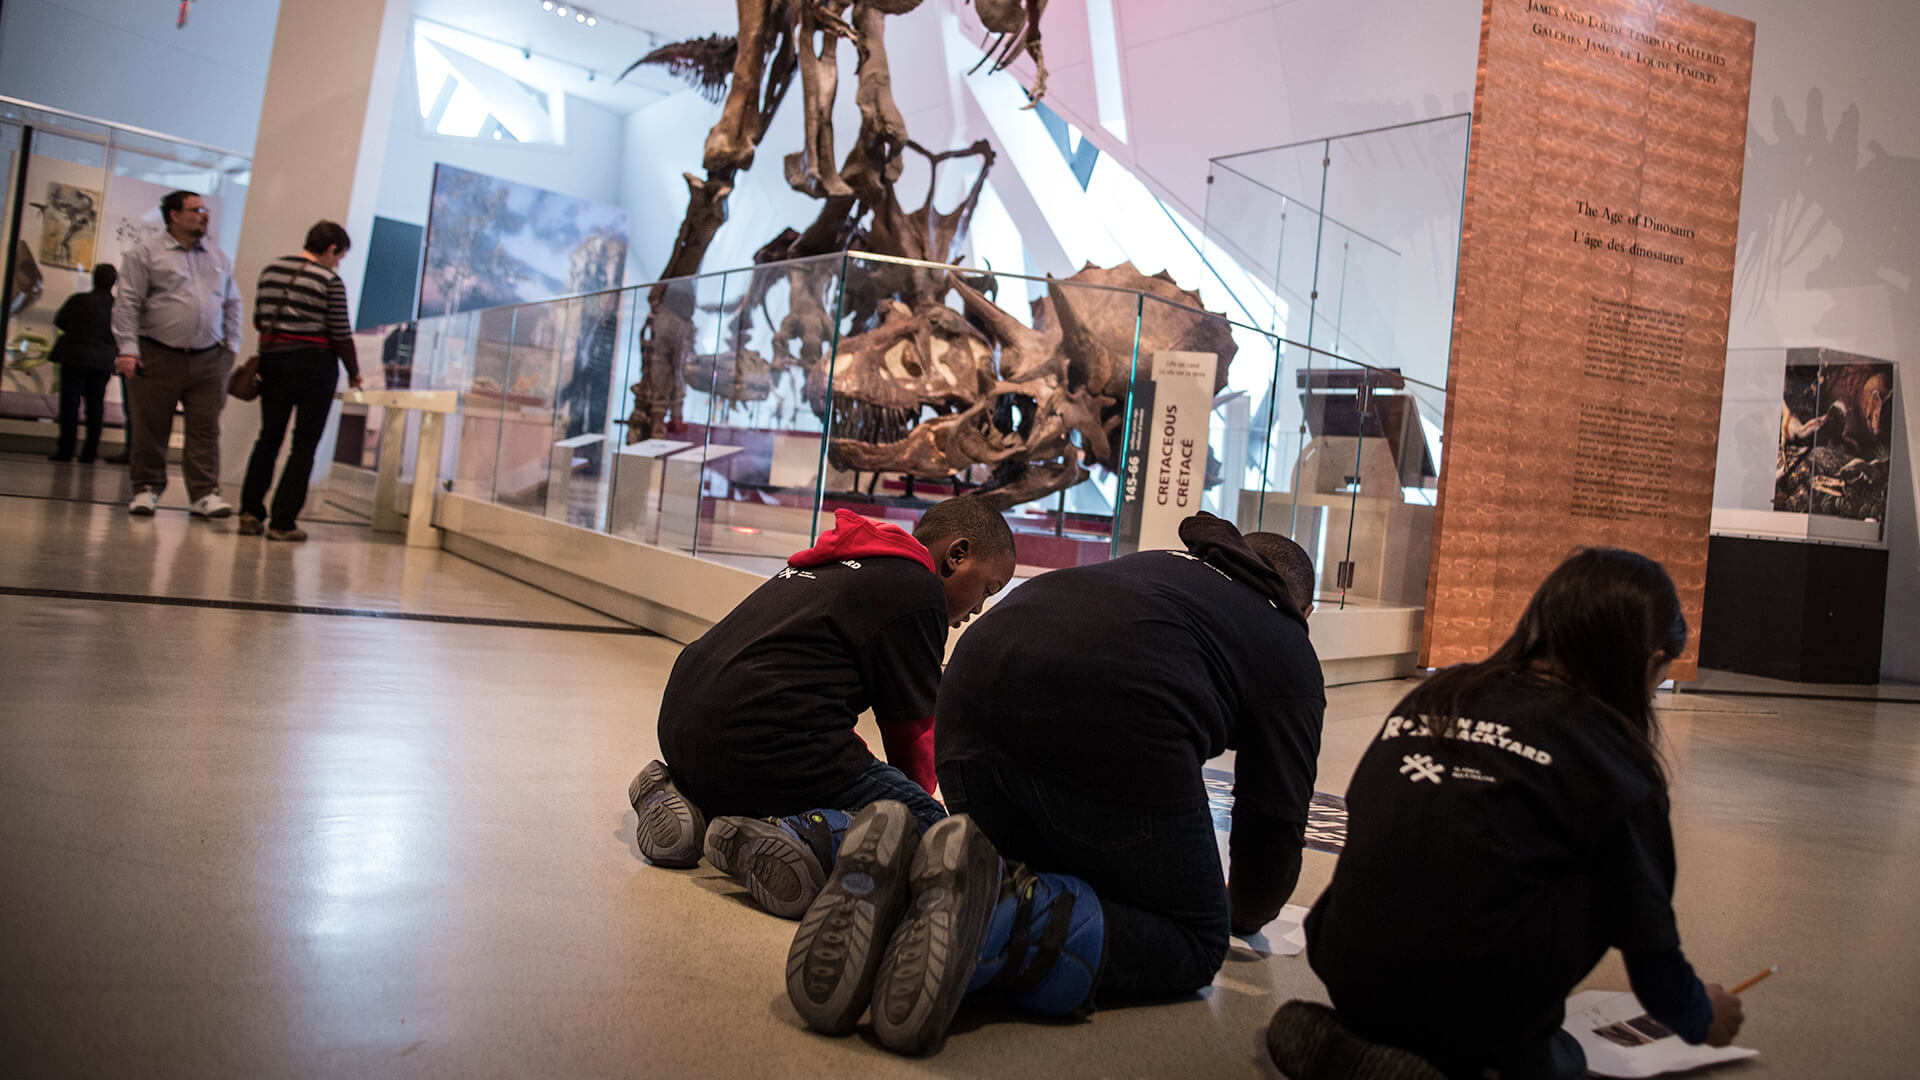 Three young students crouched on the floor in front of a dinosaur display case filling in worksheets.